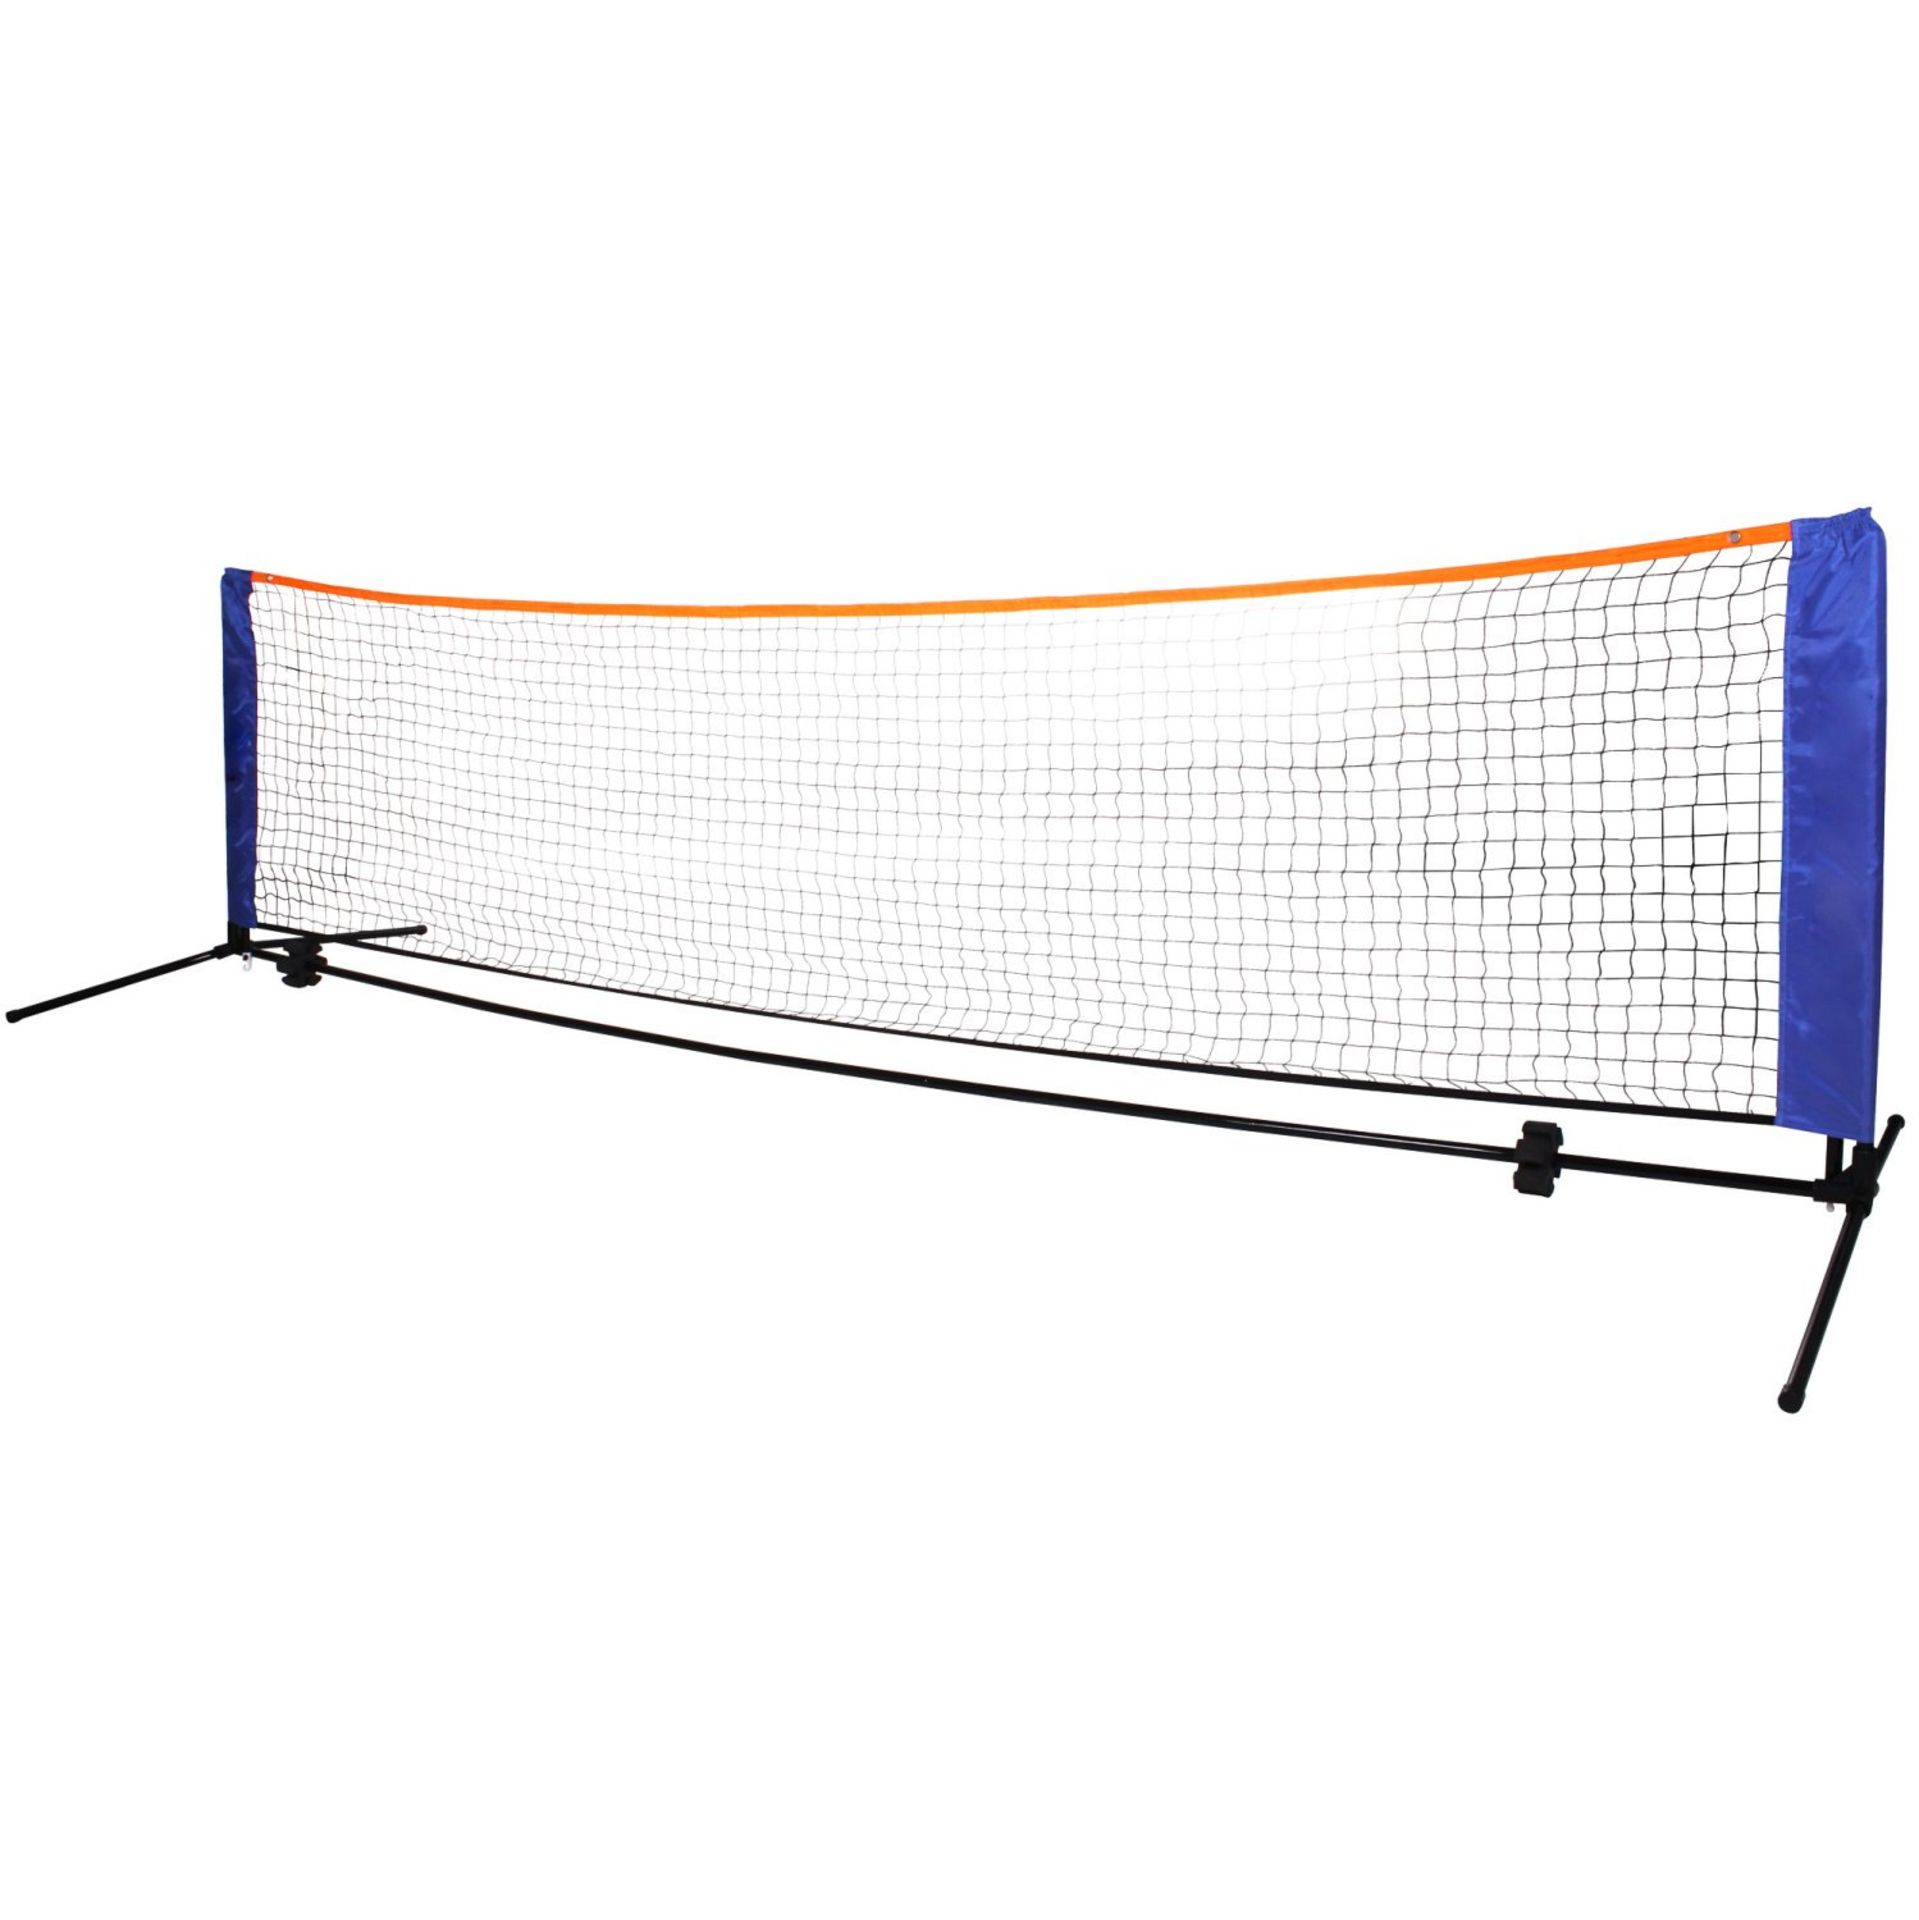 (RL29) Medium 4m Adjustable Foldable Badminton Tennis Volleyball Net The posts are able to... - Image 2 of 2